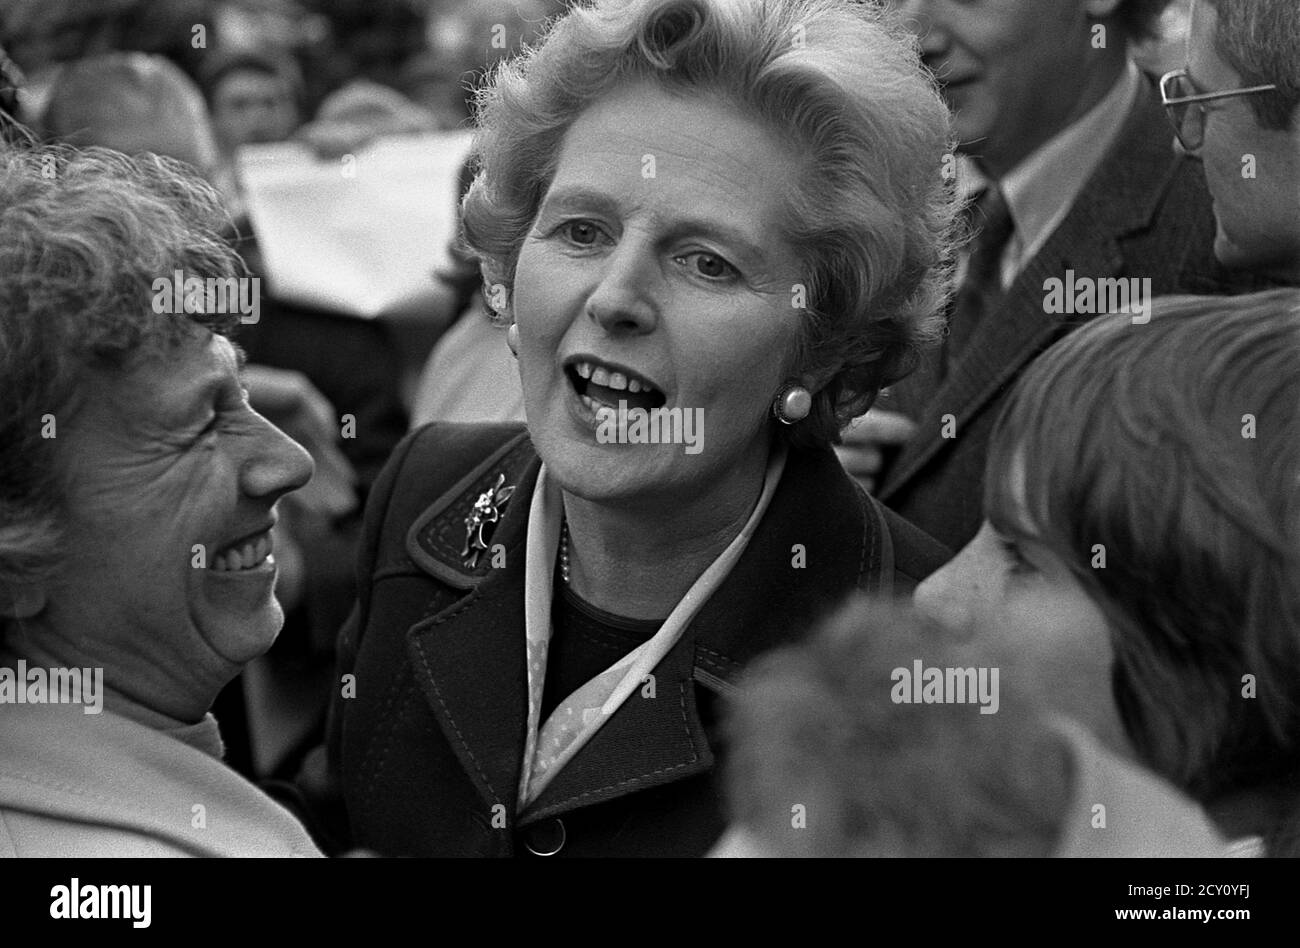 AJAXNETPHOTO.11TH FEBRUARY,1977. PORTSMOUTH, ENGLAND.  - CITY WALKABOUT - MRS MARGARET THATCHER (CON), LEADER OF THE OPPOSITION, ENGAGES WITH THE PUBLIC IN COMMERCIAL ROAD SHOPPING PRECINCT DURING A CAMPAIGN WALKABOUT. PHOTO:JONATHAN EASTLAND/AJAX REF:3771102 52 Stock Photo